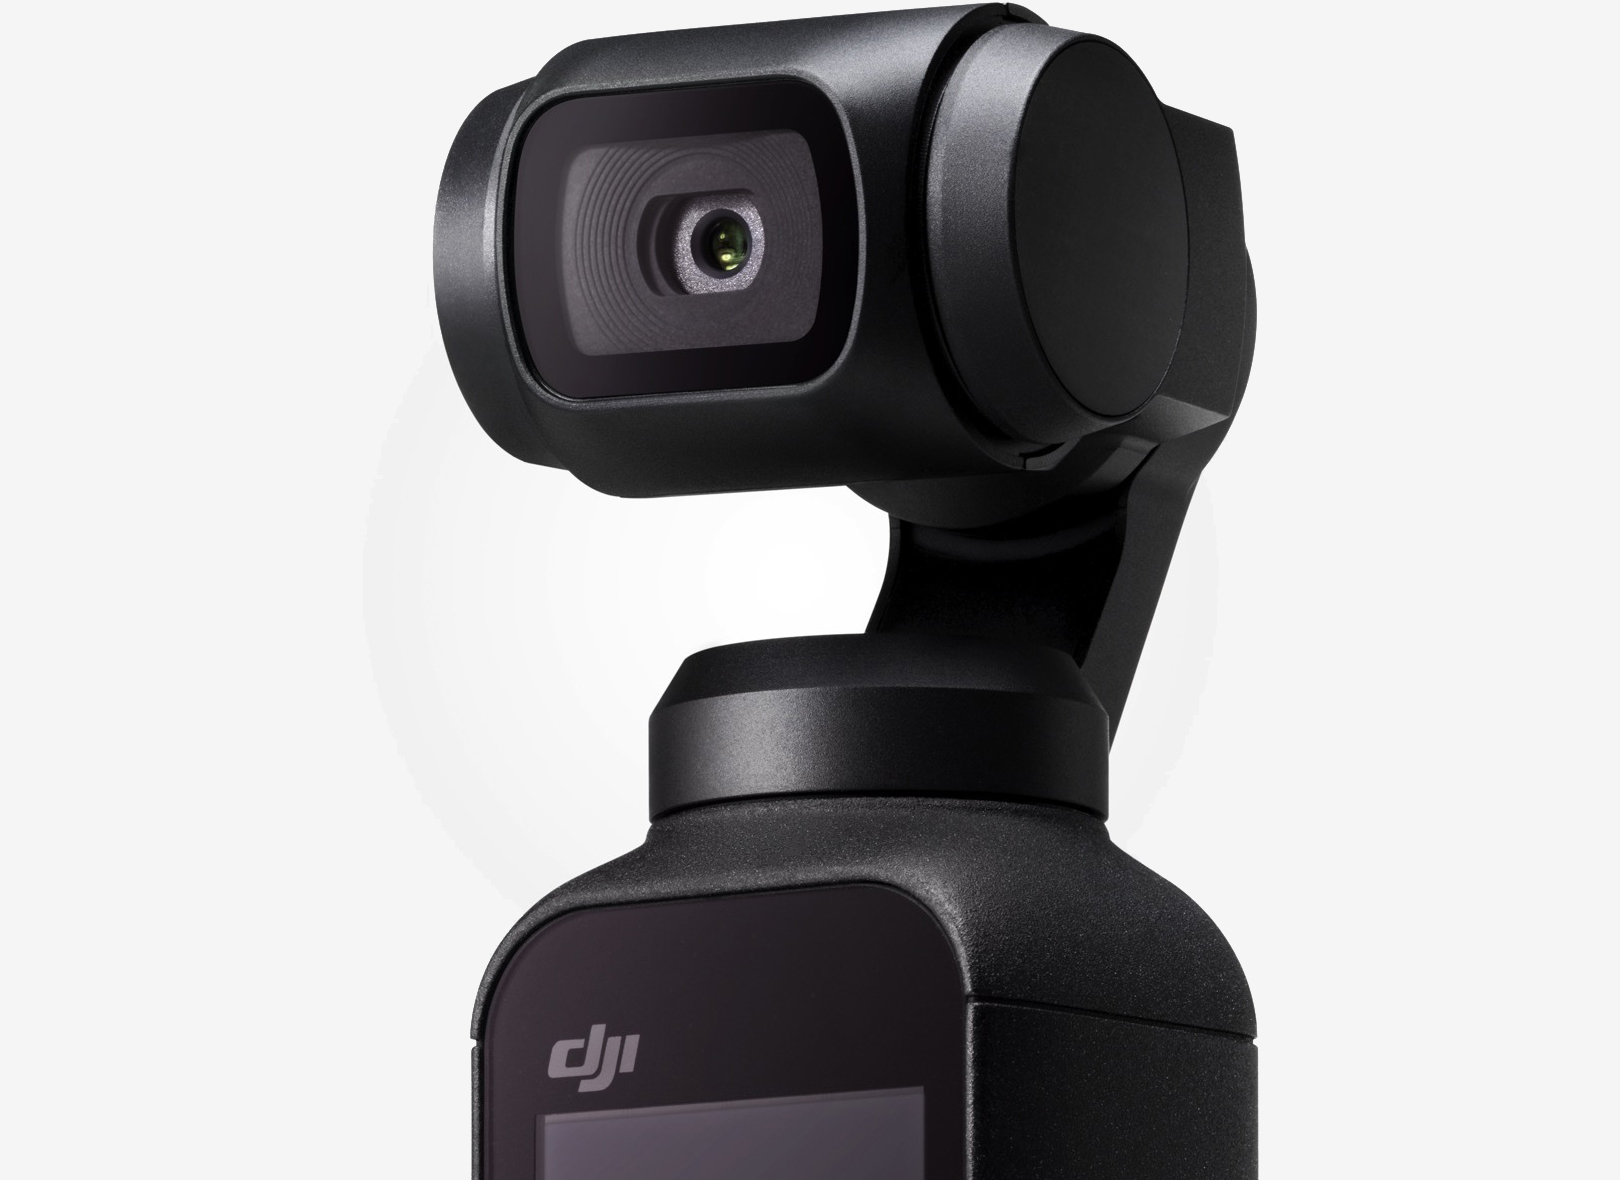 DJI's stabilized Osmo Pocket camera launches next month for $349 